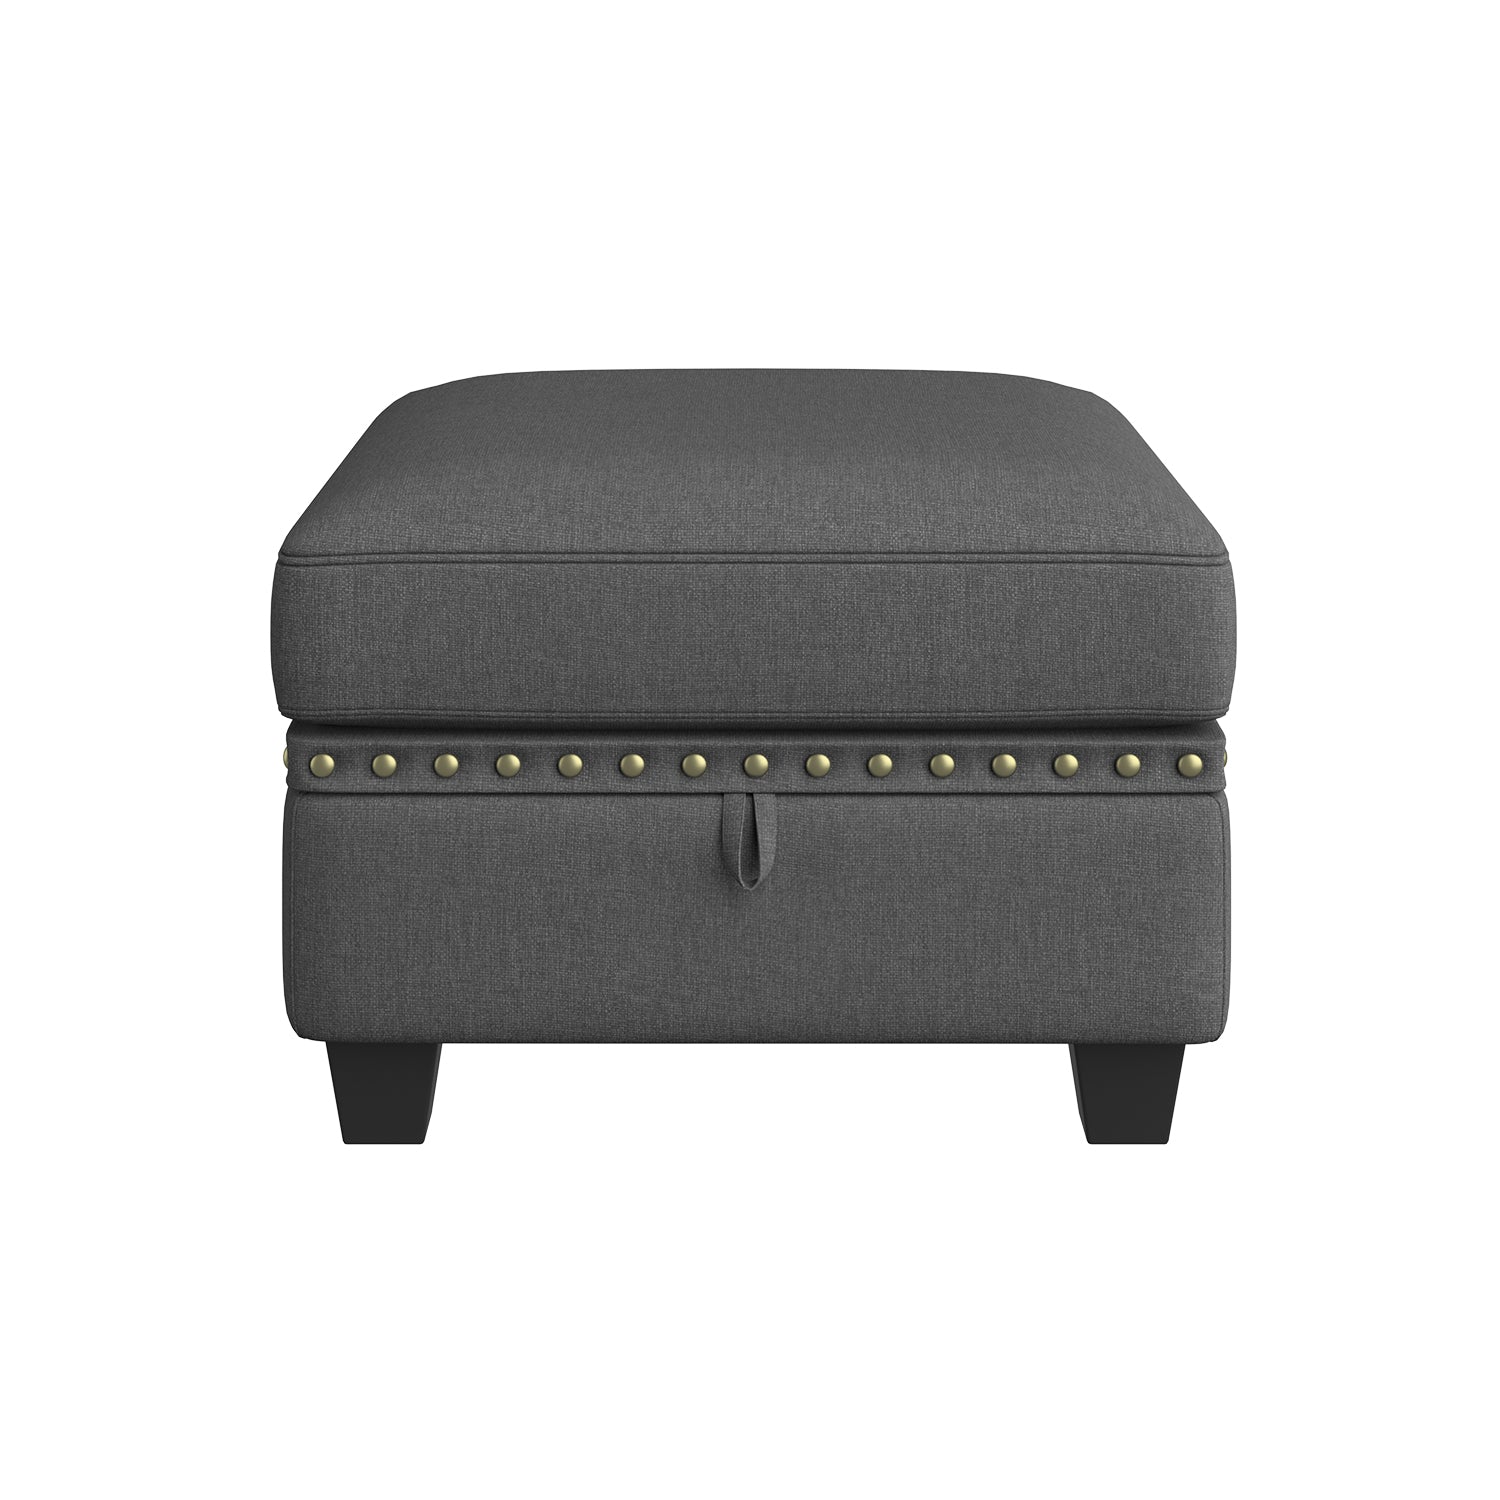 HONBAY Square Storage Ottoman for Sectional Sofa